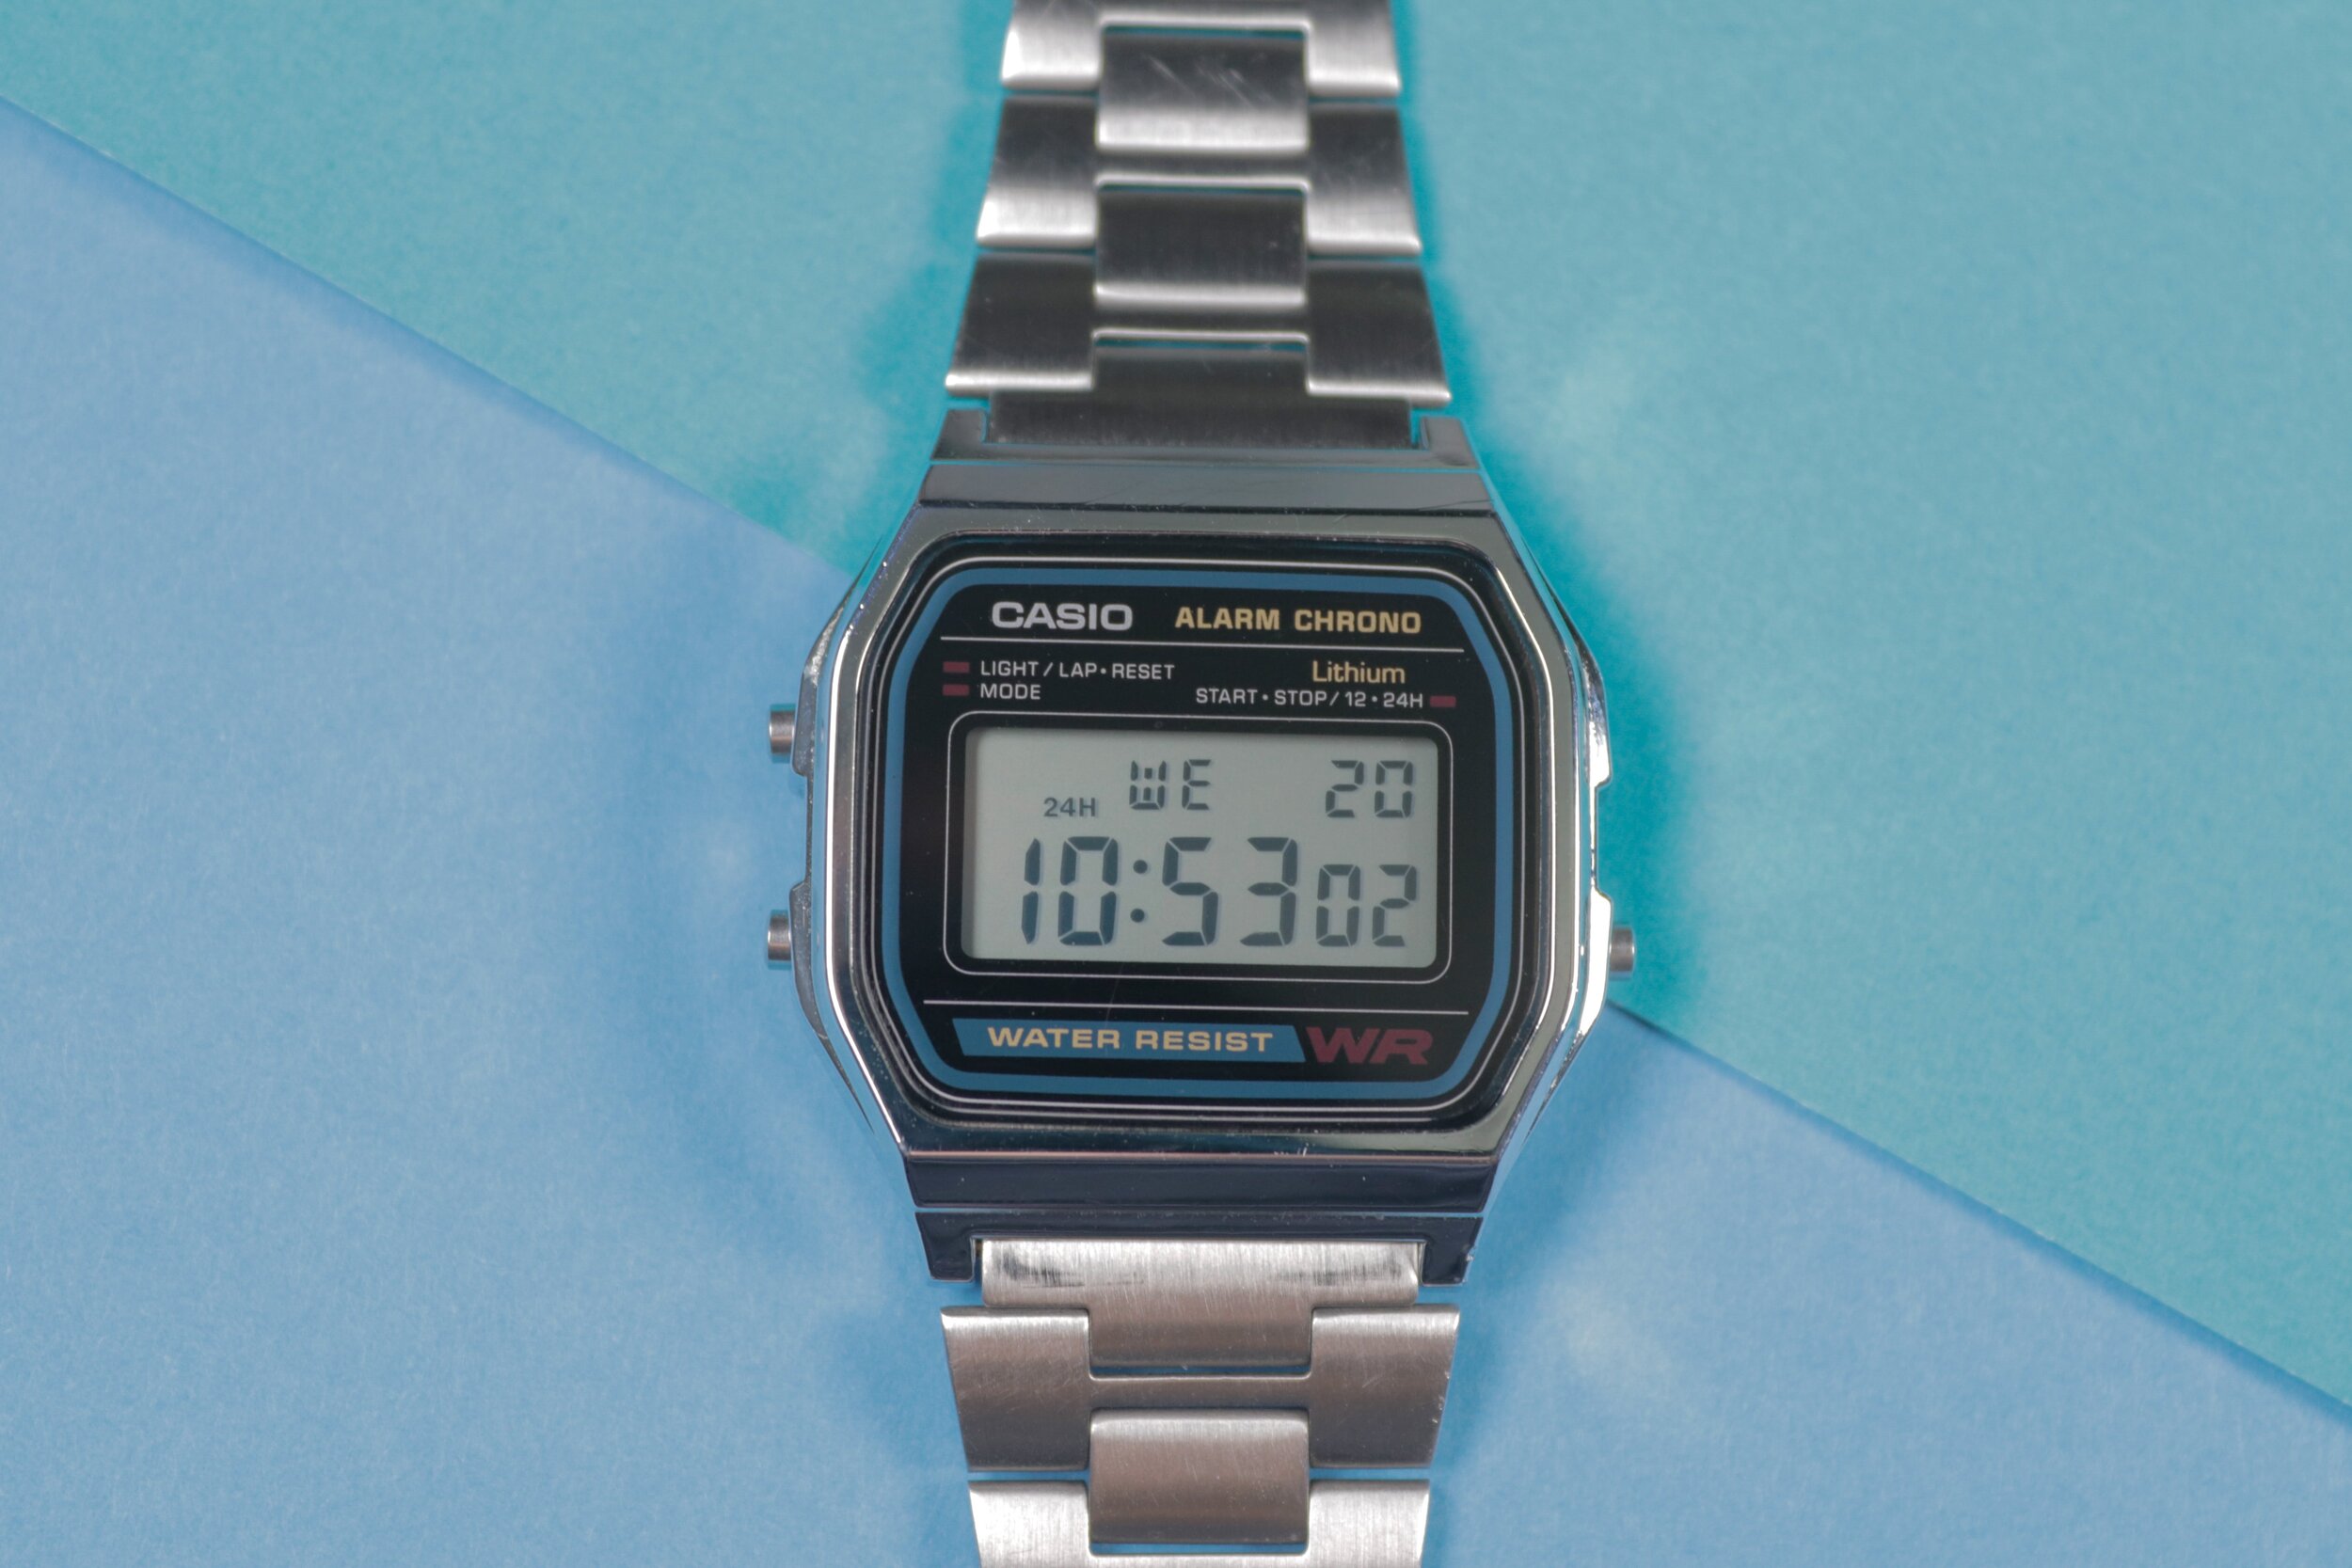 Casio A158 Vs A168 The Retro Casio Watch Battle Ben S Watch Club Exploring Affordable Watches